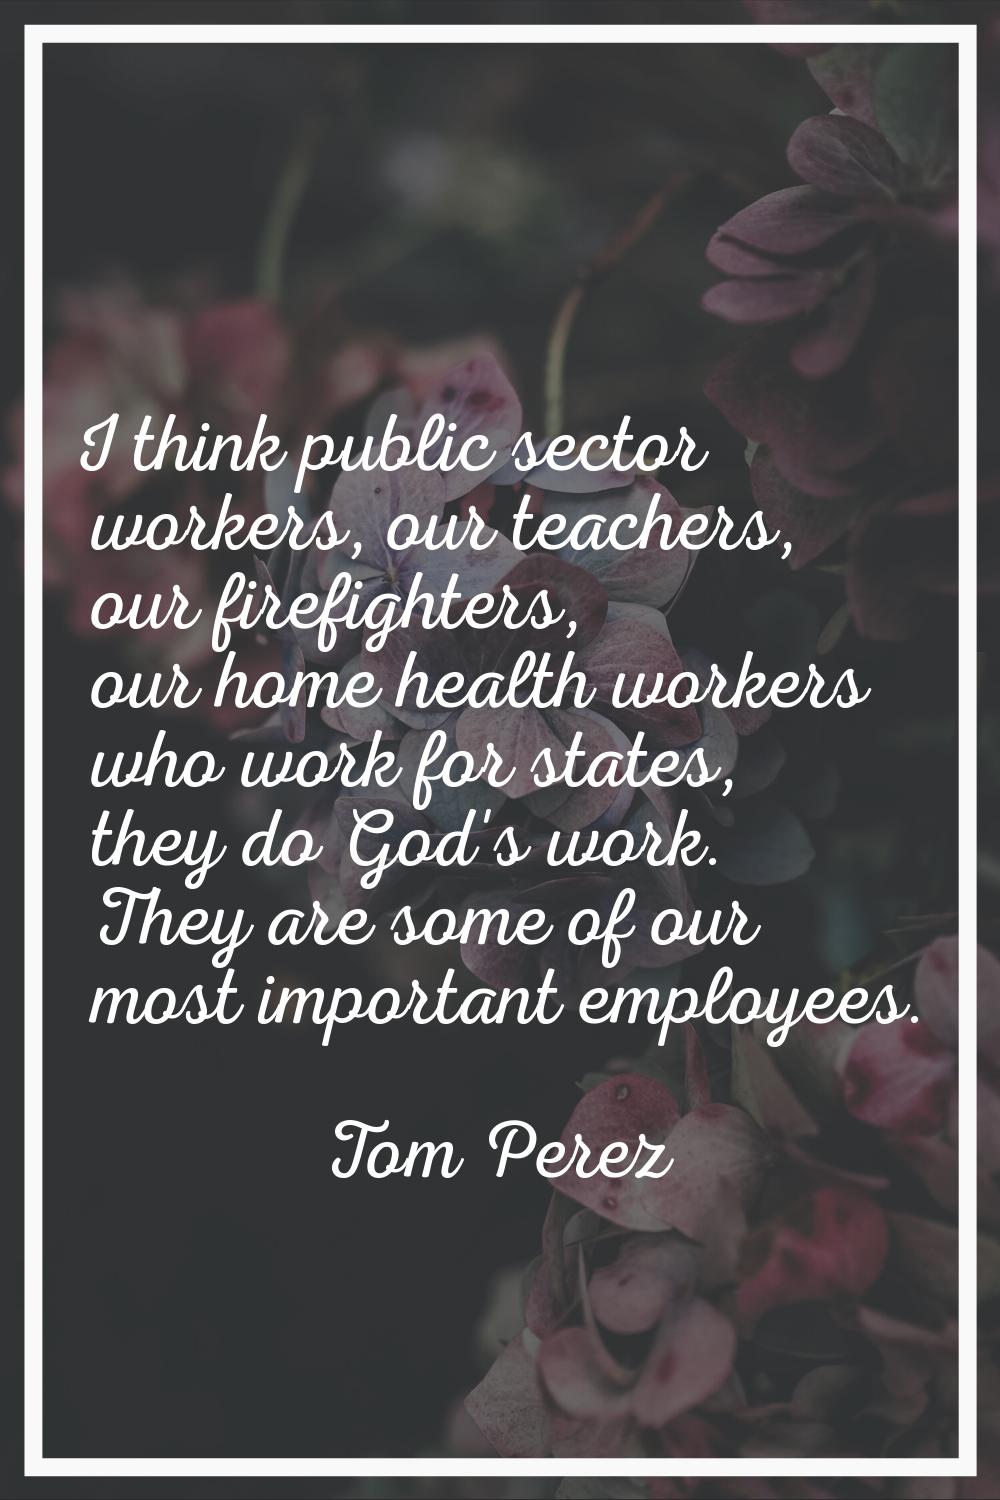 I think public sector workers, our teachers, our firefighters, our home health workers who work for